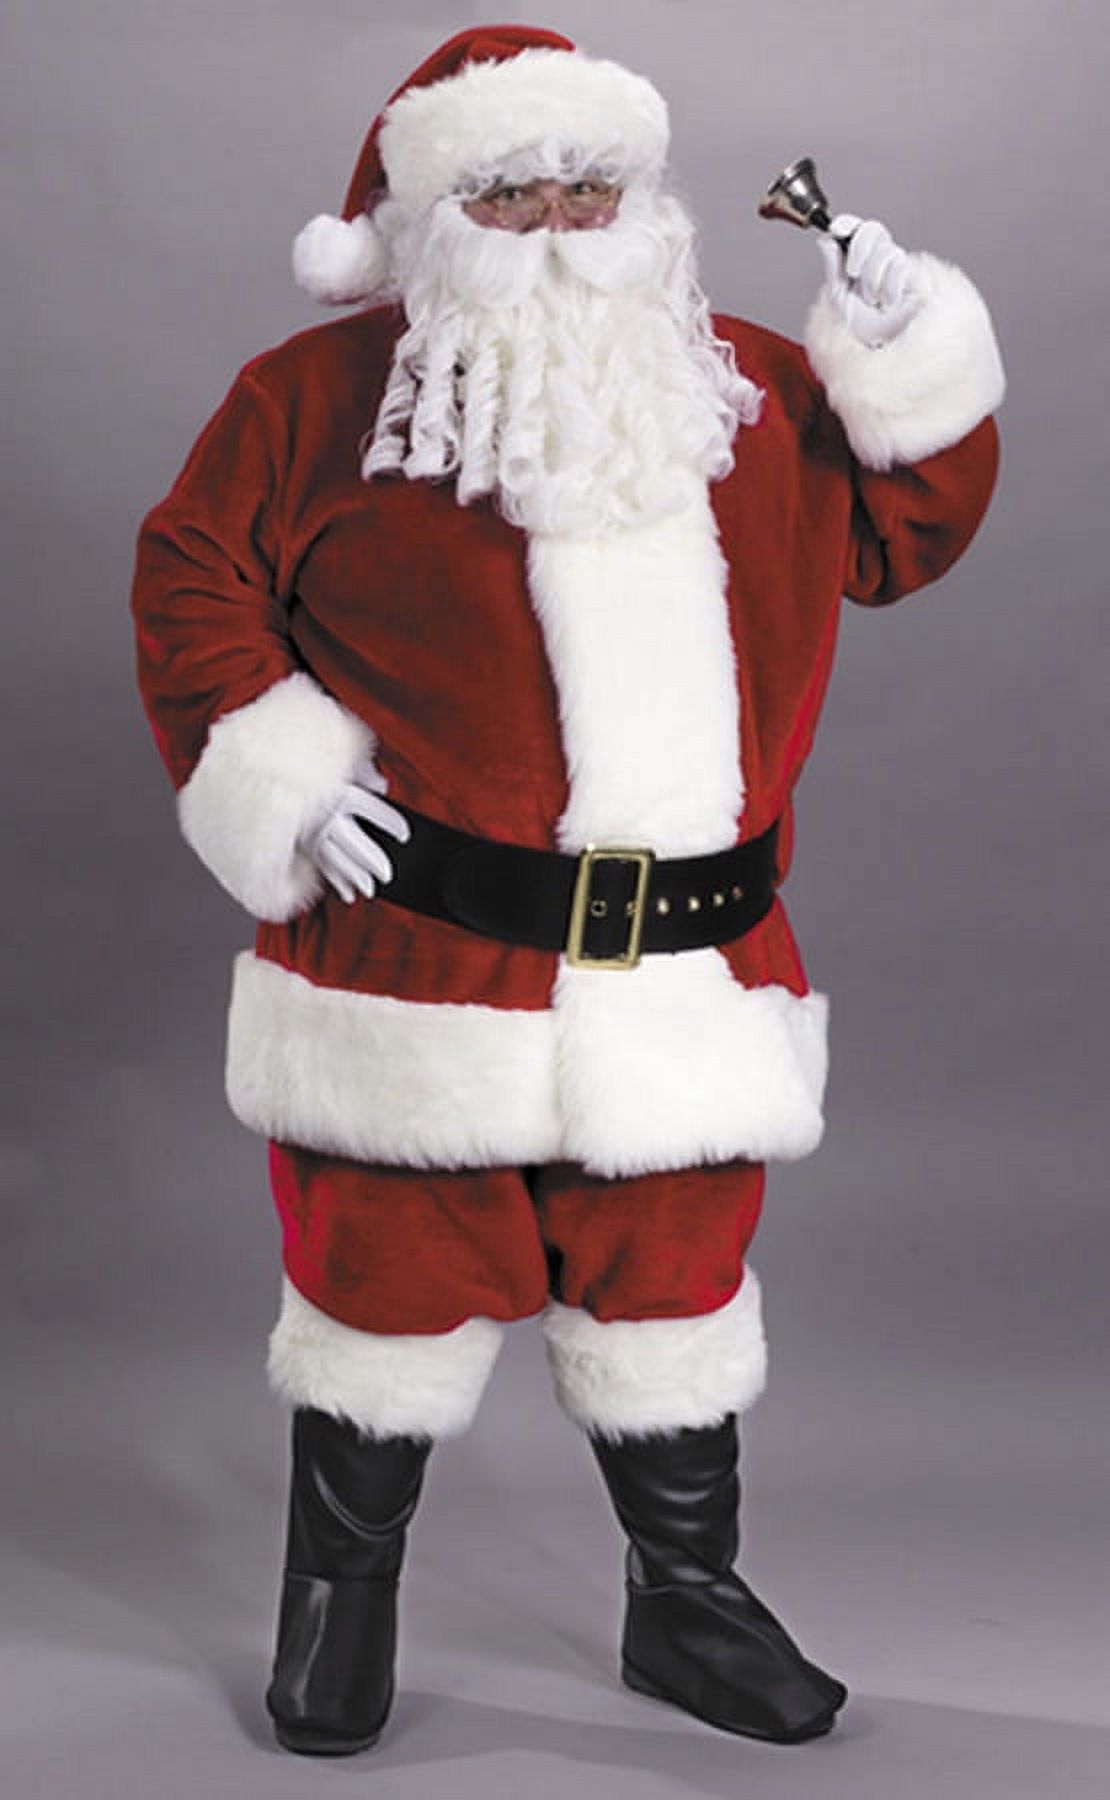 Red Santa Claus Suit Costume Adult Quality 2x 3x Boot Covers Belt Faux Fur New - image 1 of 2